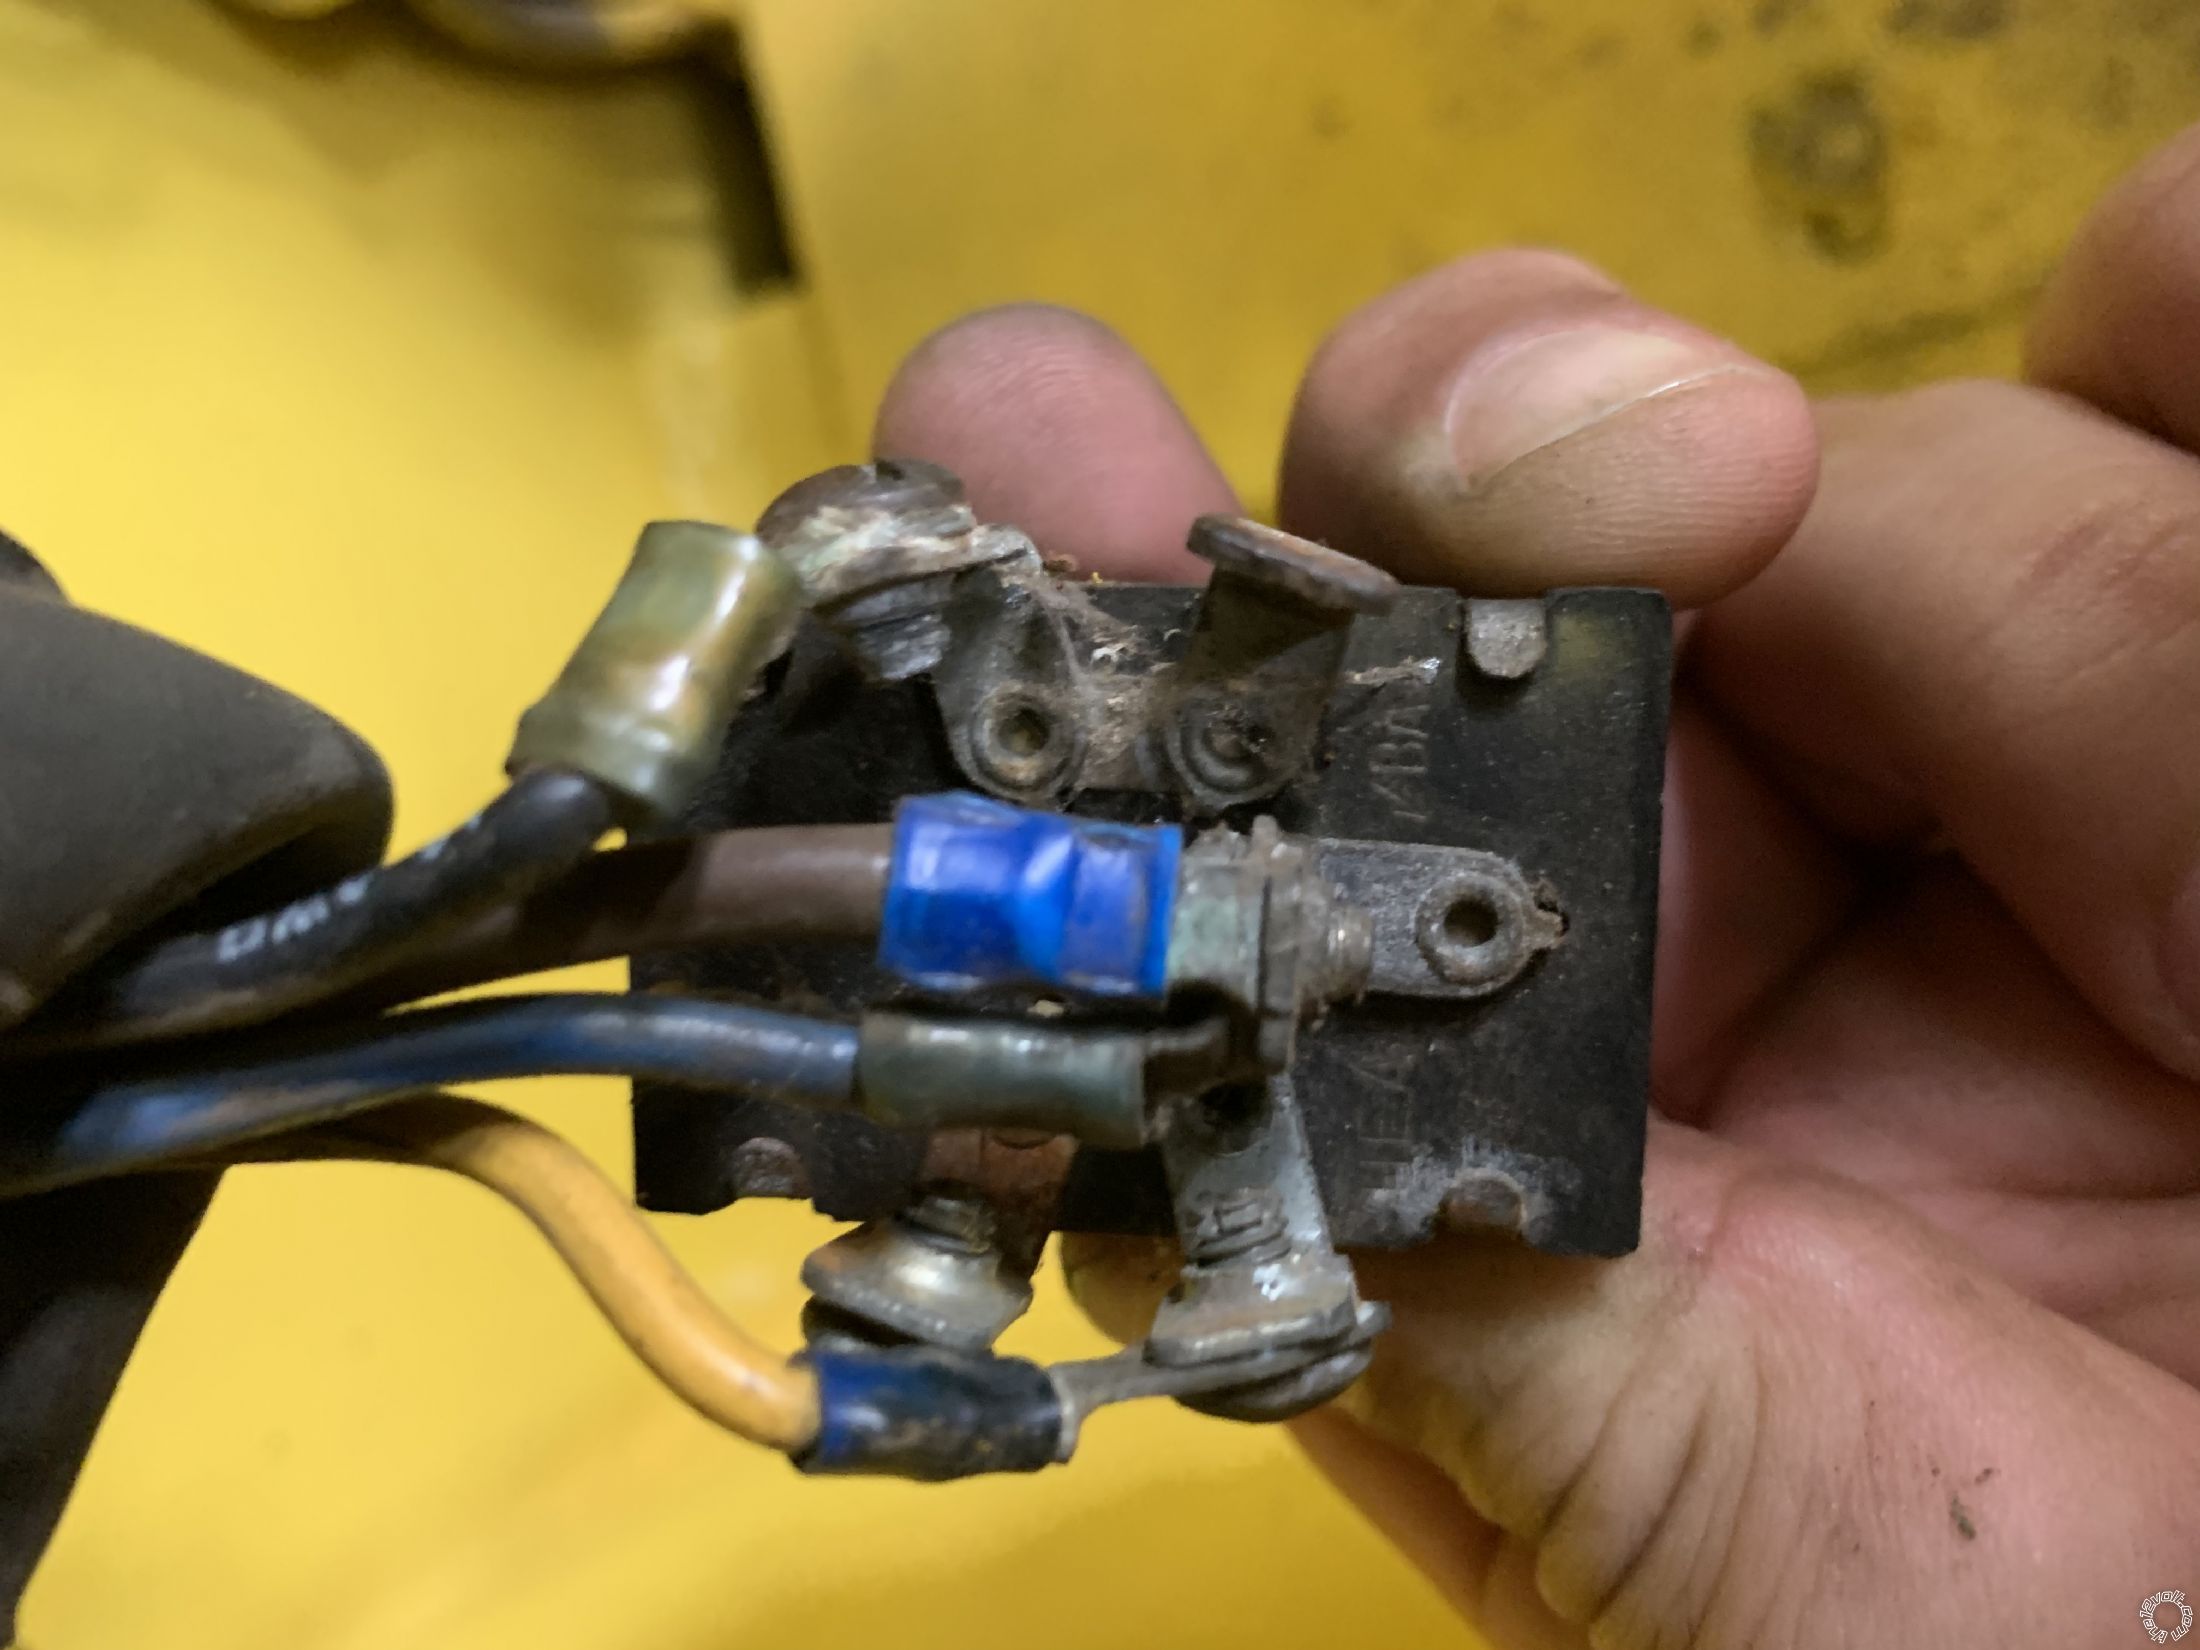 Forklift Lights, Pull-Out Type Switch Wiring -- posted image.